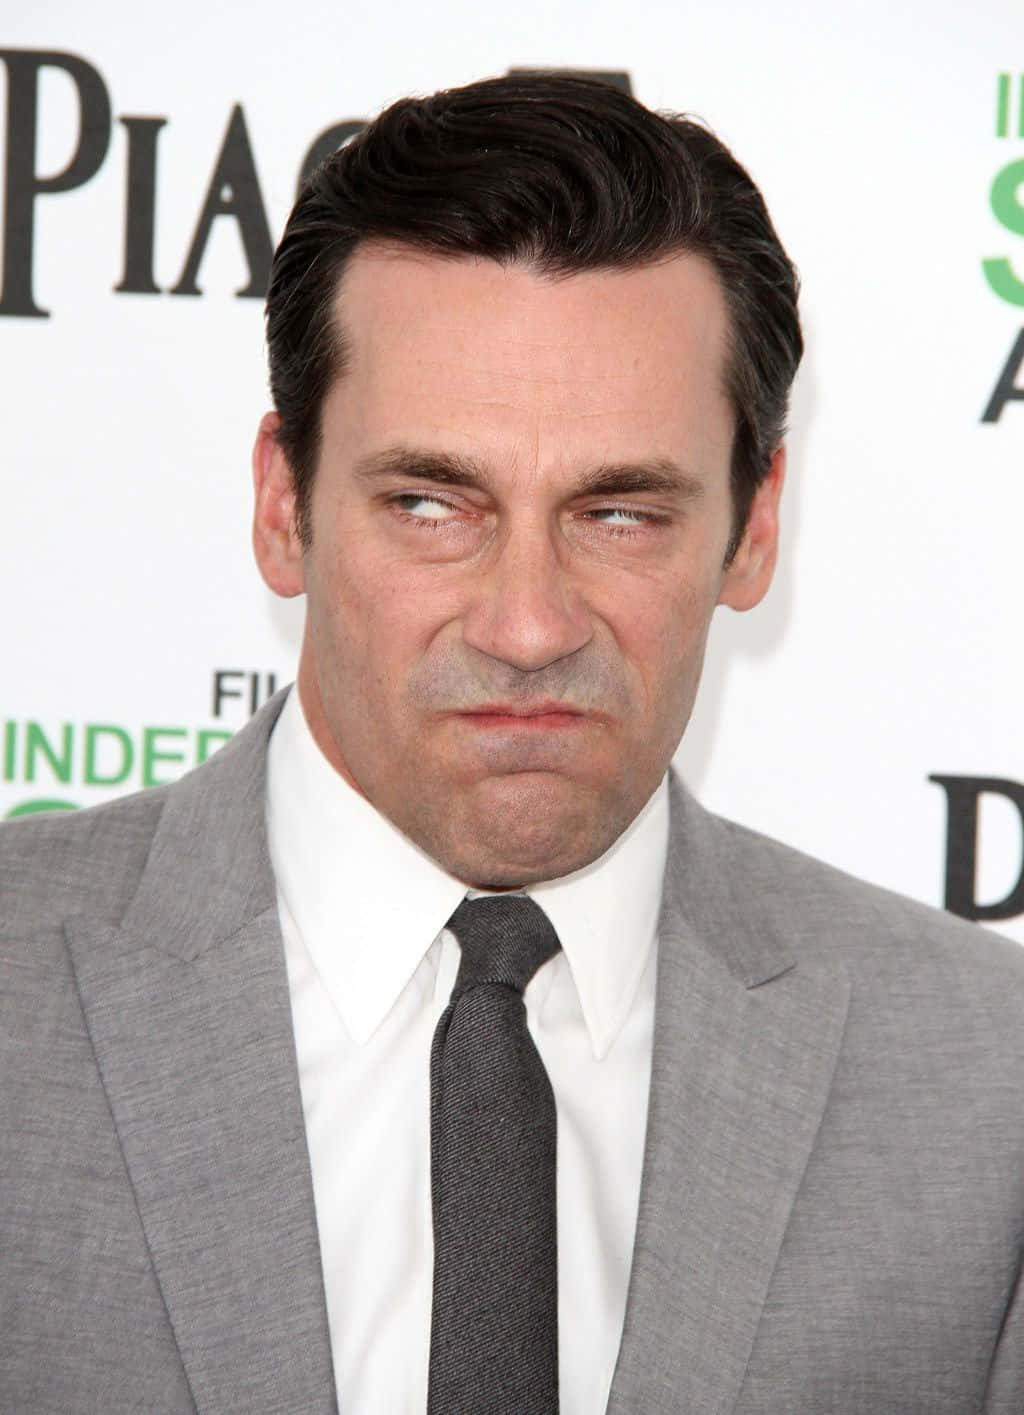 Jon Hamm, actor and director in Hollywood Wallpaper